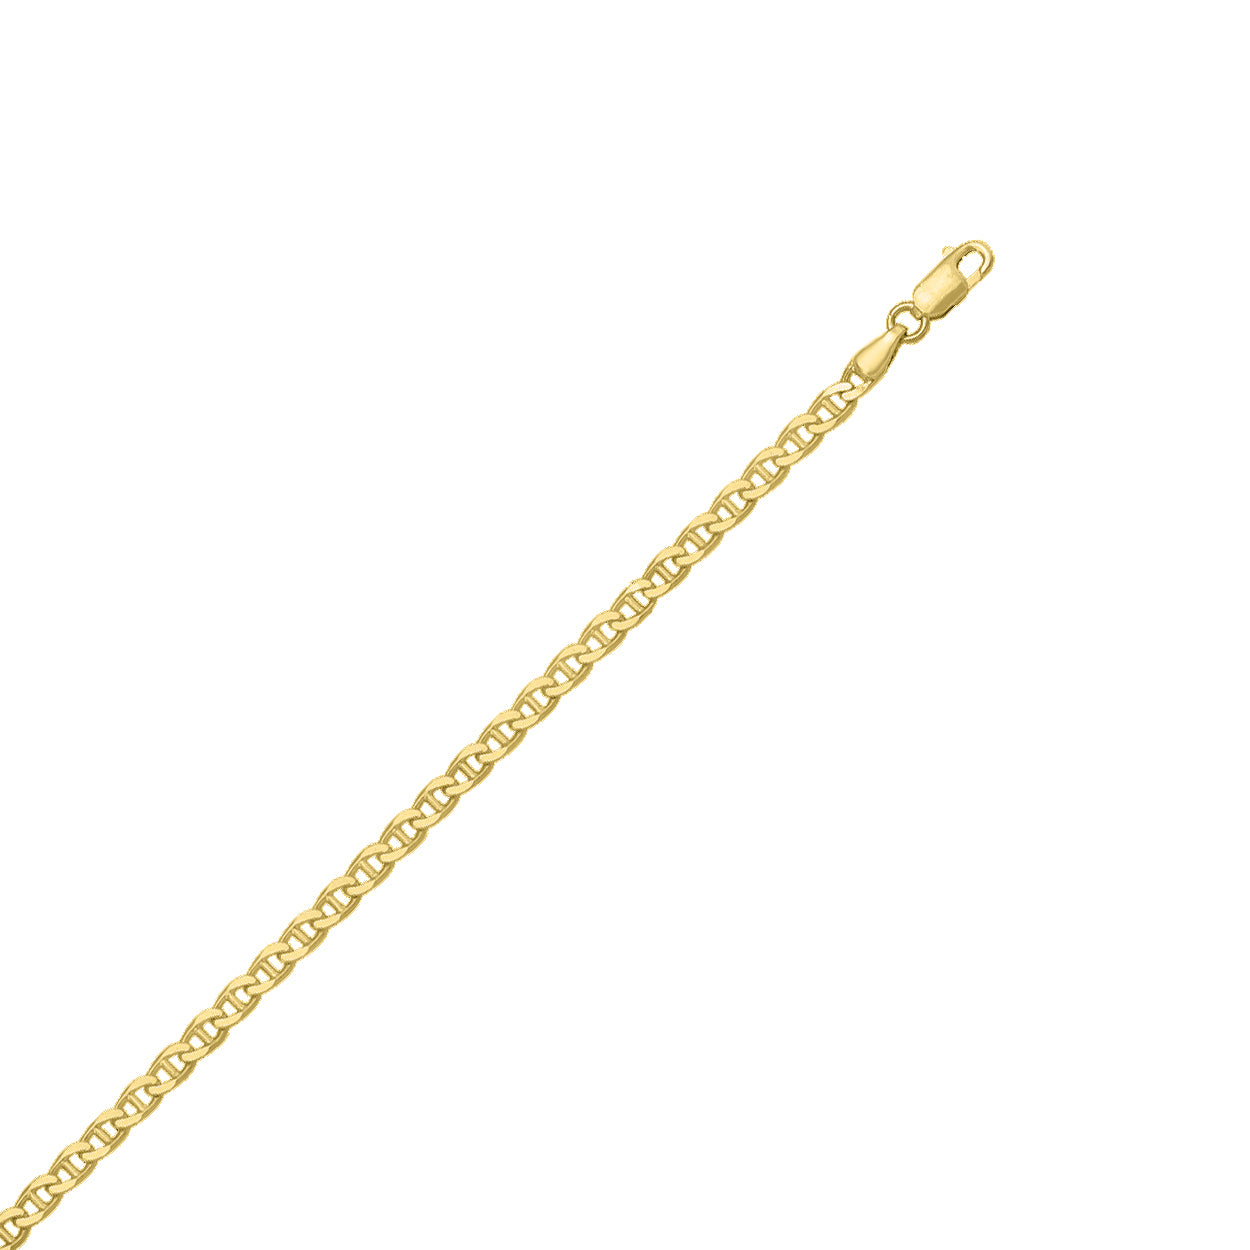 Solid Yellow Gold 18KT Marine Style Bracelet 3mm Width